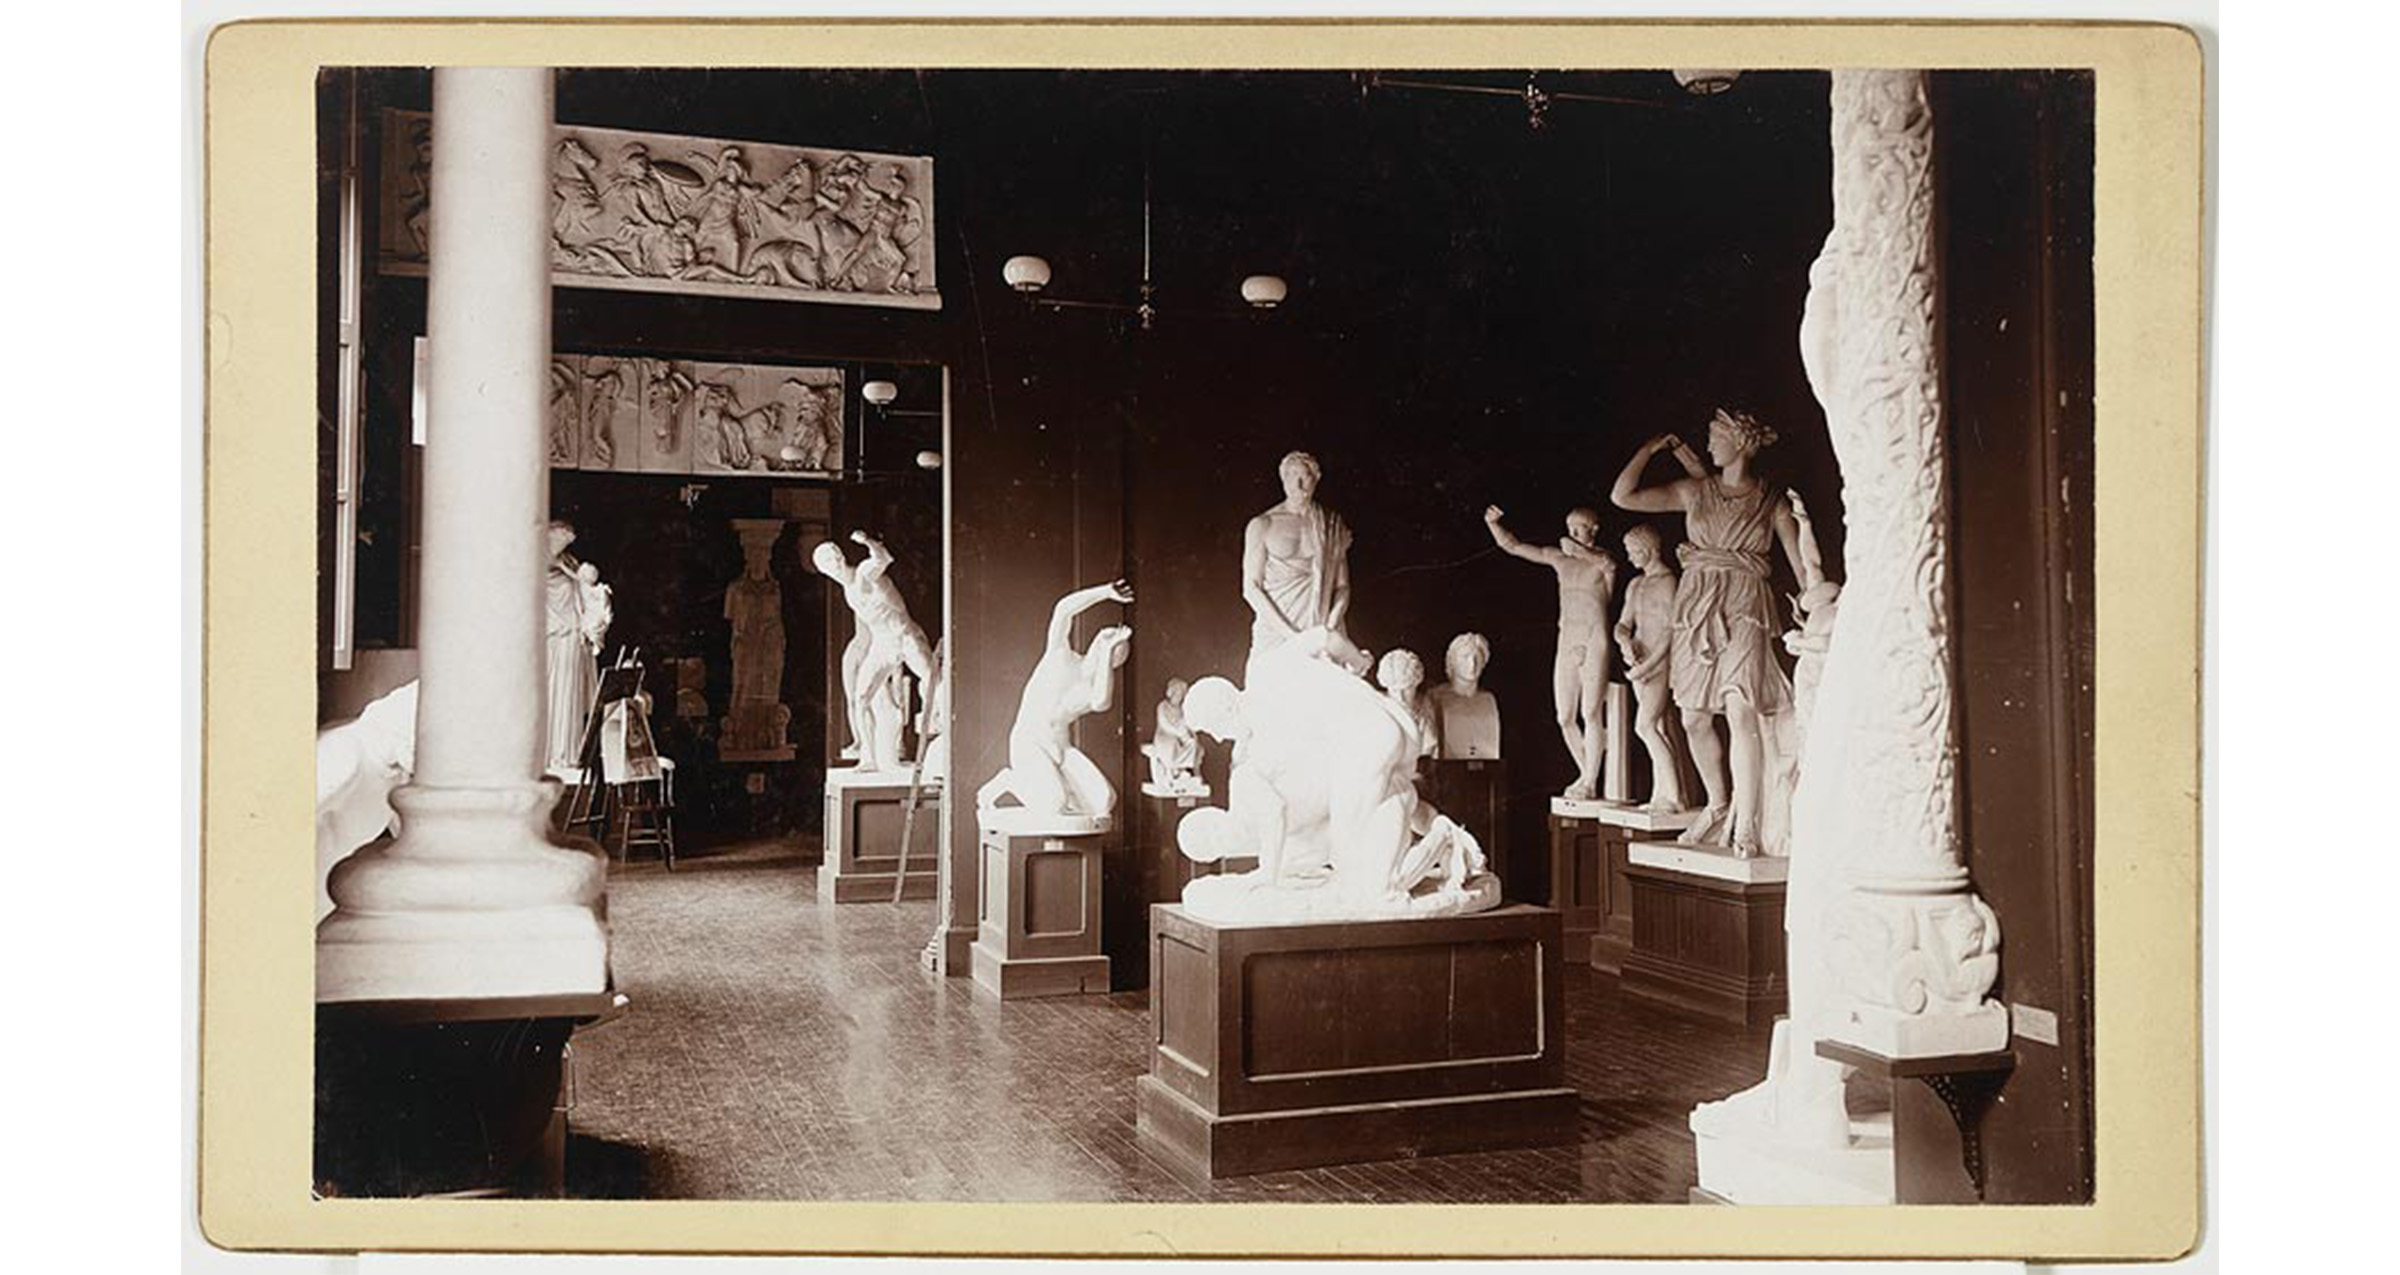 interior, building with pedestals holding plaster casts of classical sculpture and architectural elements, wood floor, hanging gas lighting, two doorways with plaster cast friezes over them